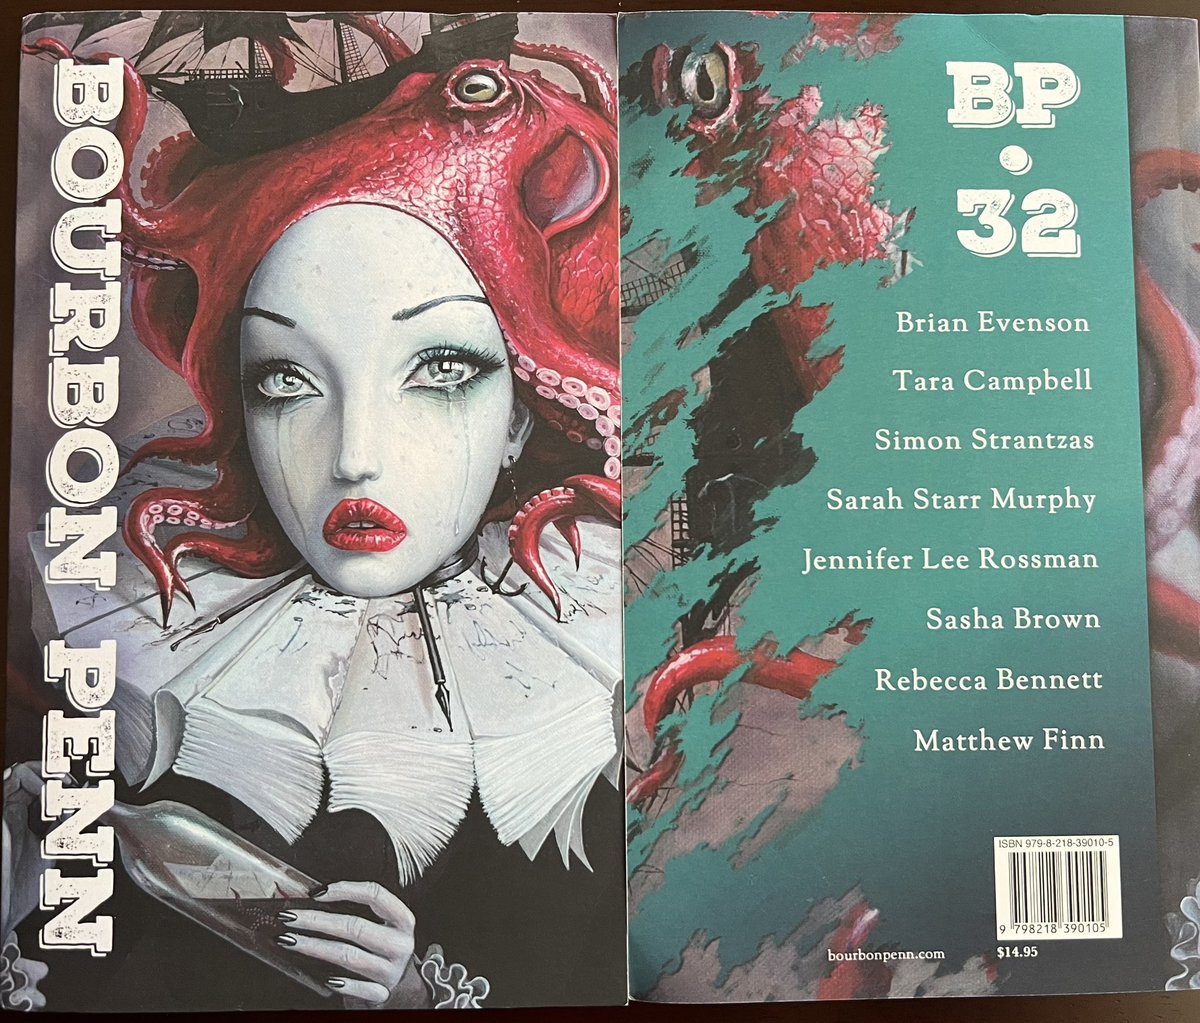 Just take a peep at this gorg cover and TOC Thank you for publishing my goofy little love letter to Green Lake @bourbonpenn